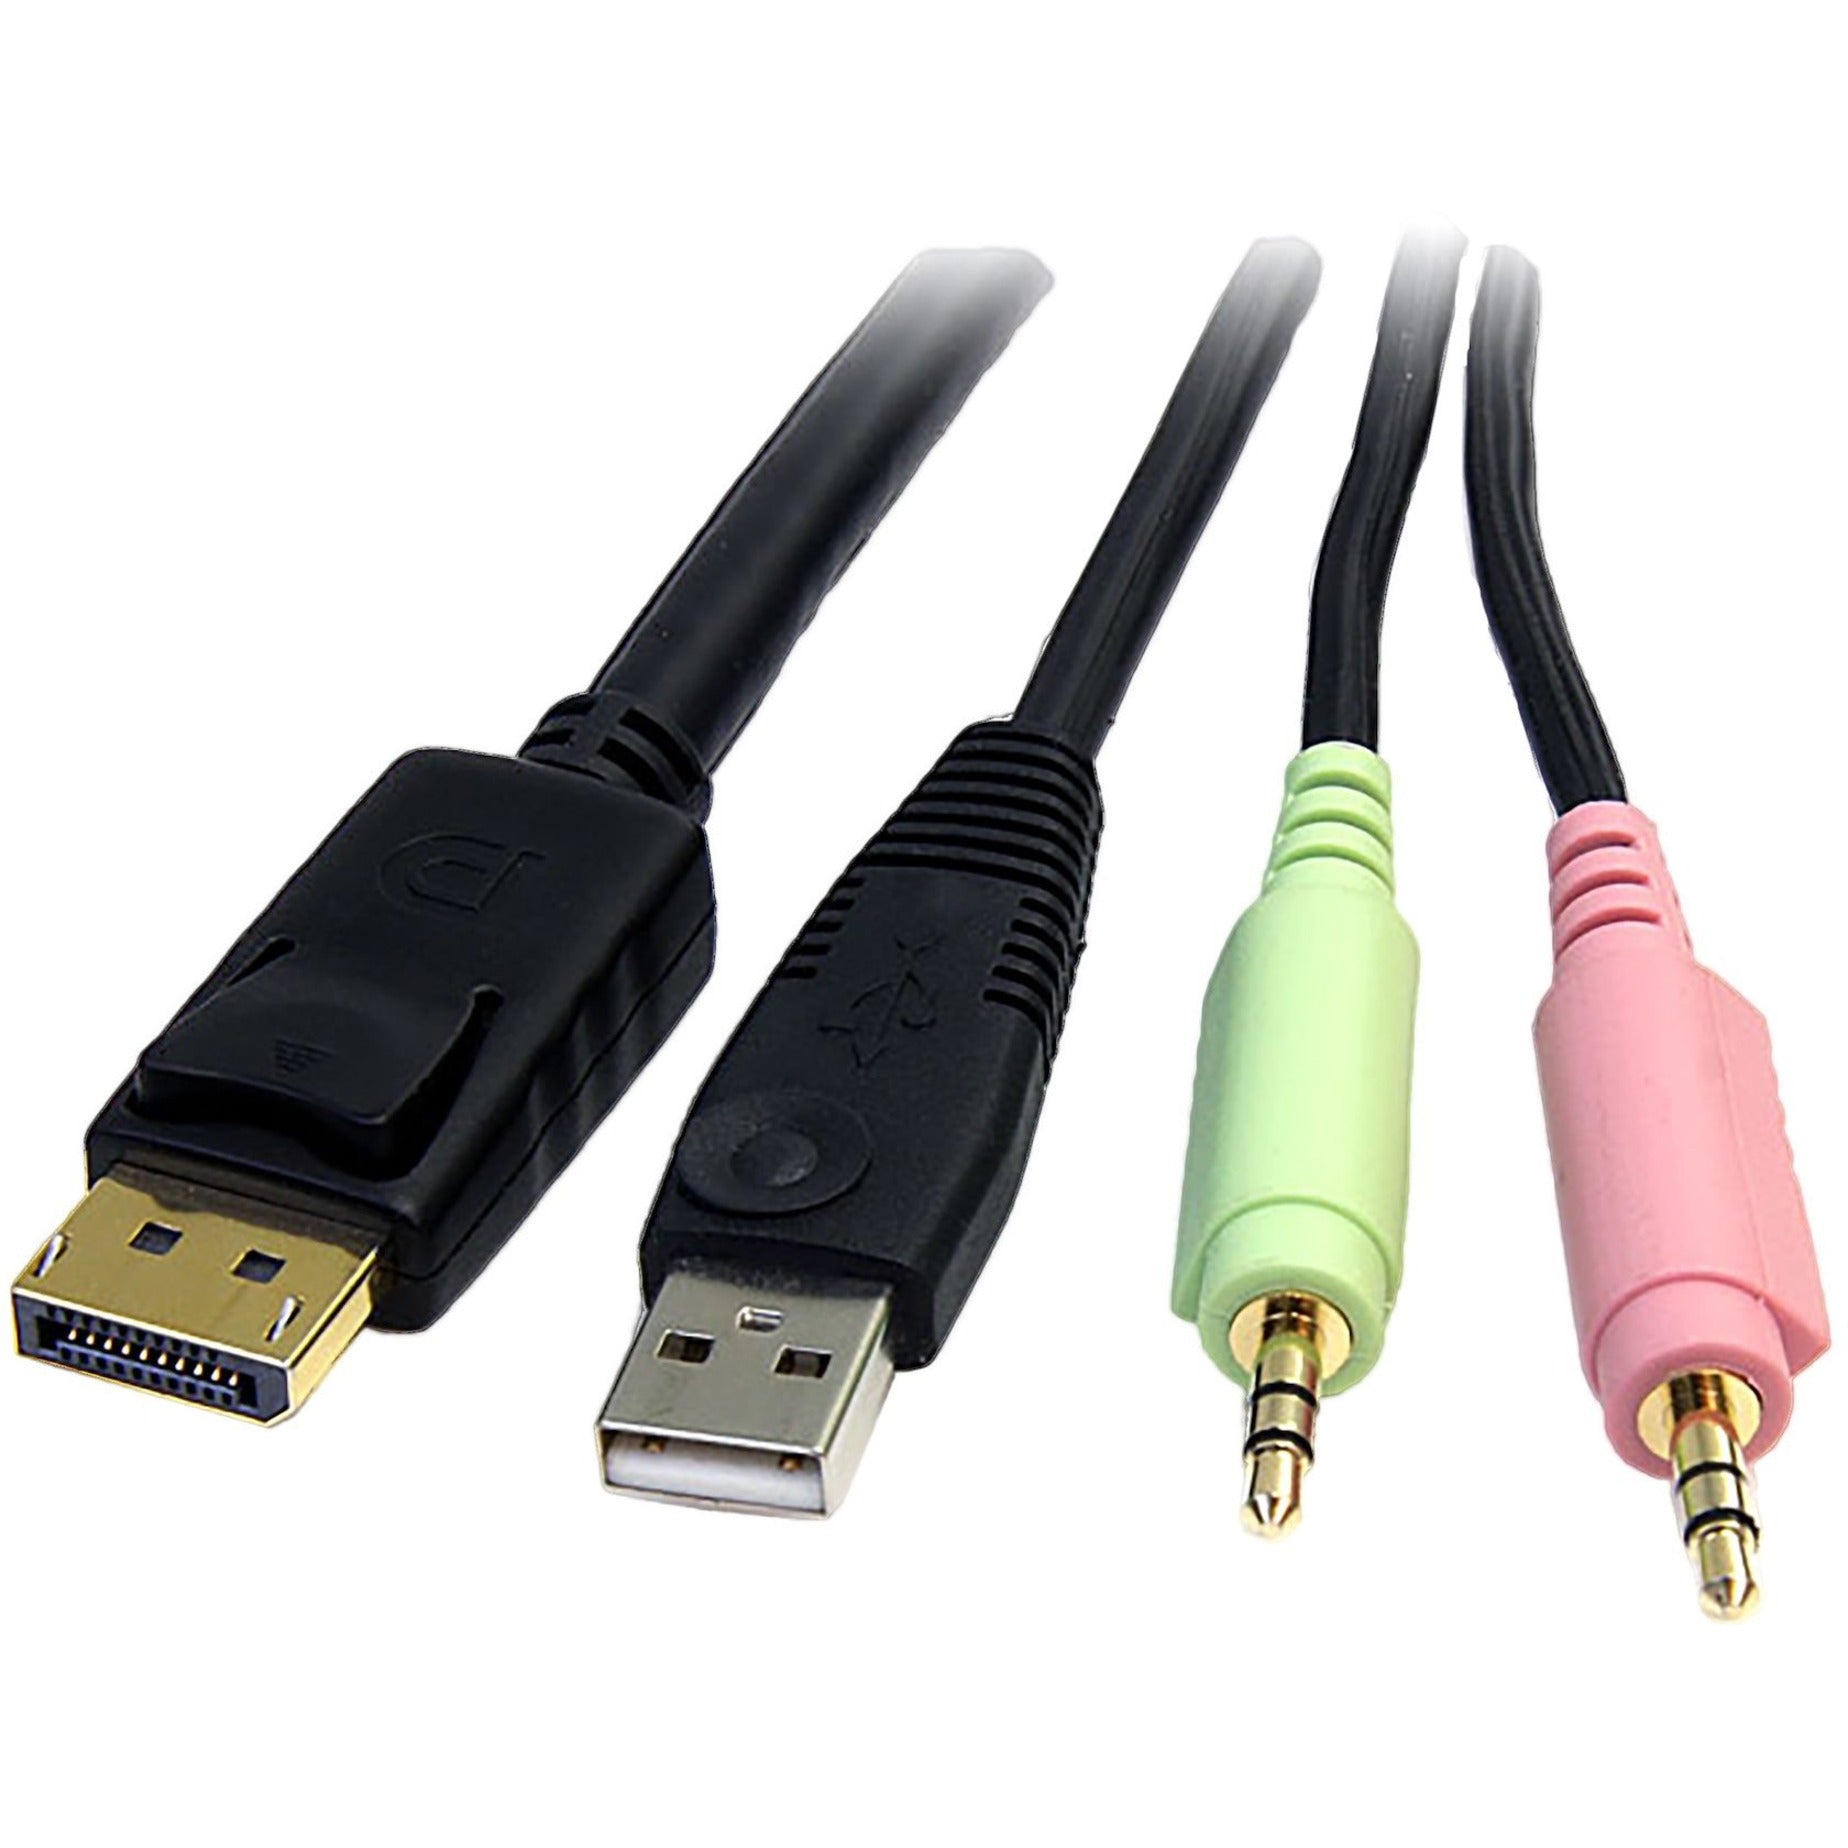 StarTech.com DP4N1USB6 6 ft 4-in-1 USB DisplayPort KVM Switch Cable, Molded, Strain Relief, Gold Plated Connectors